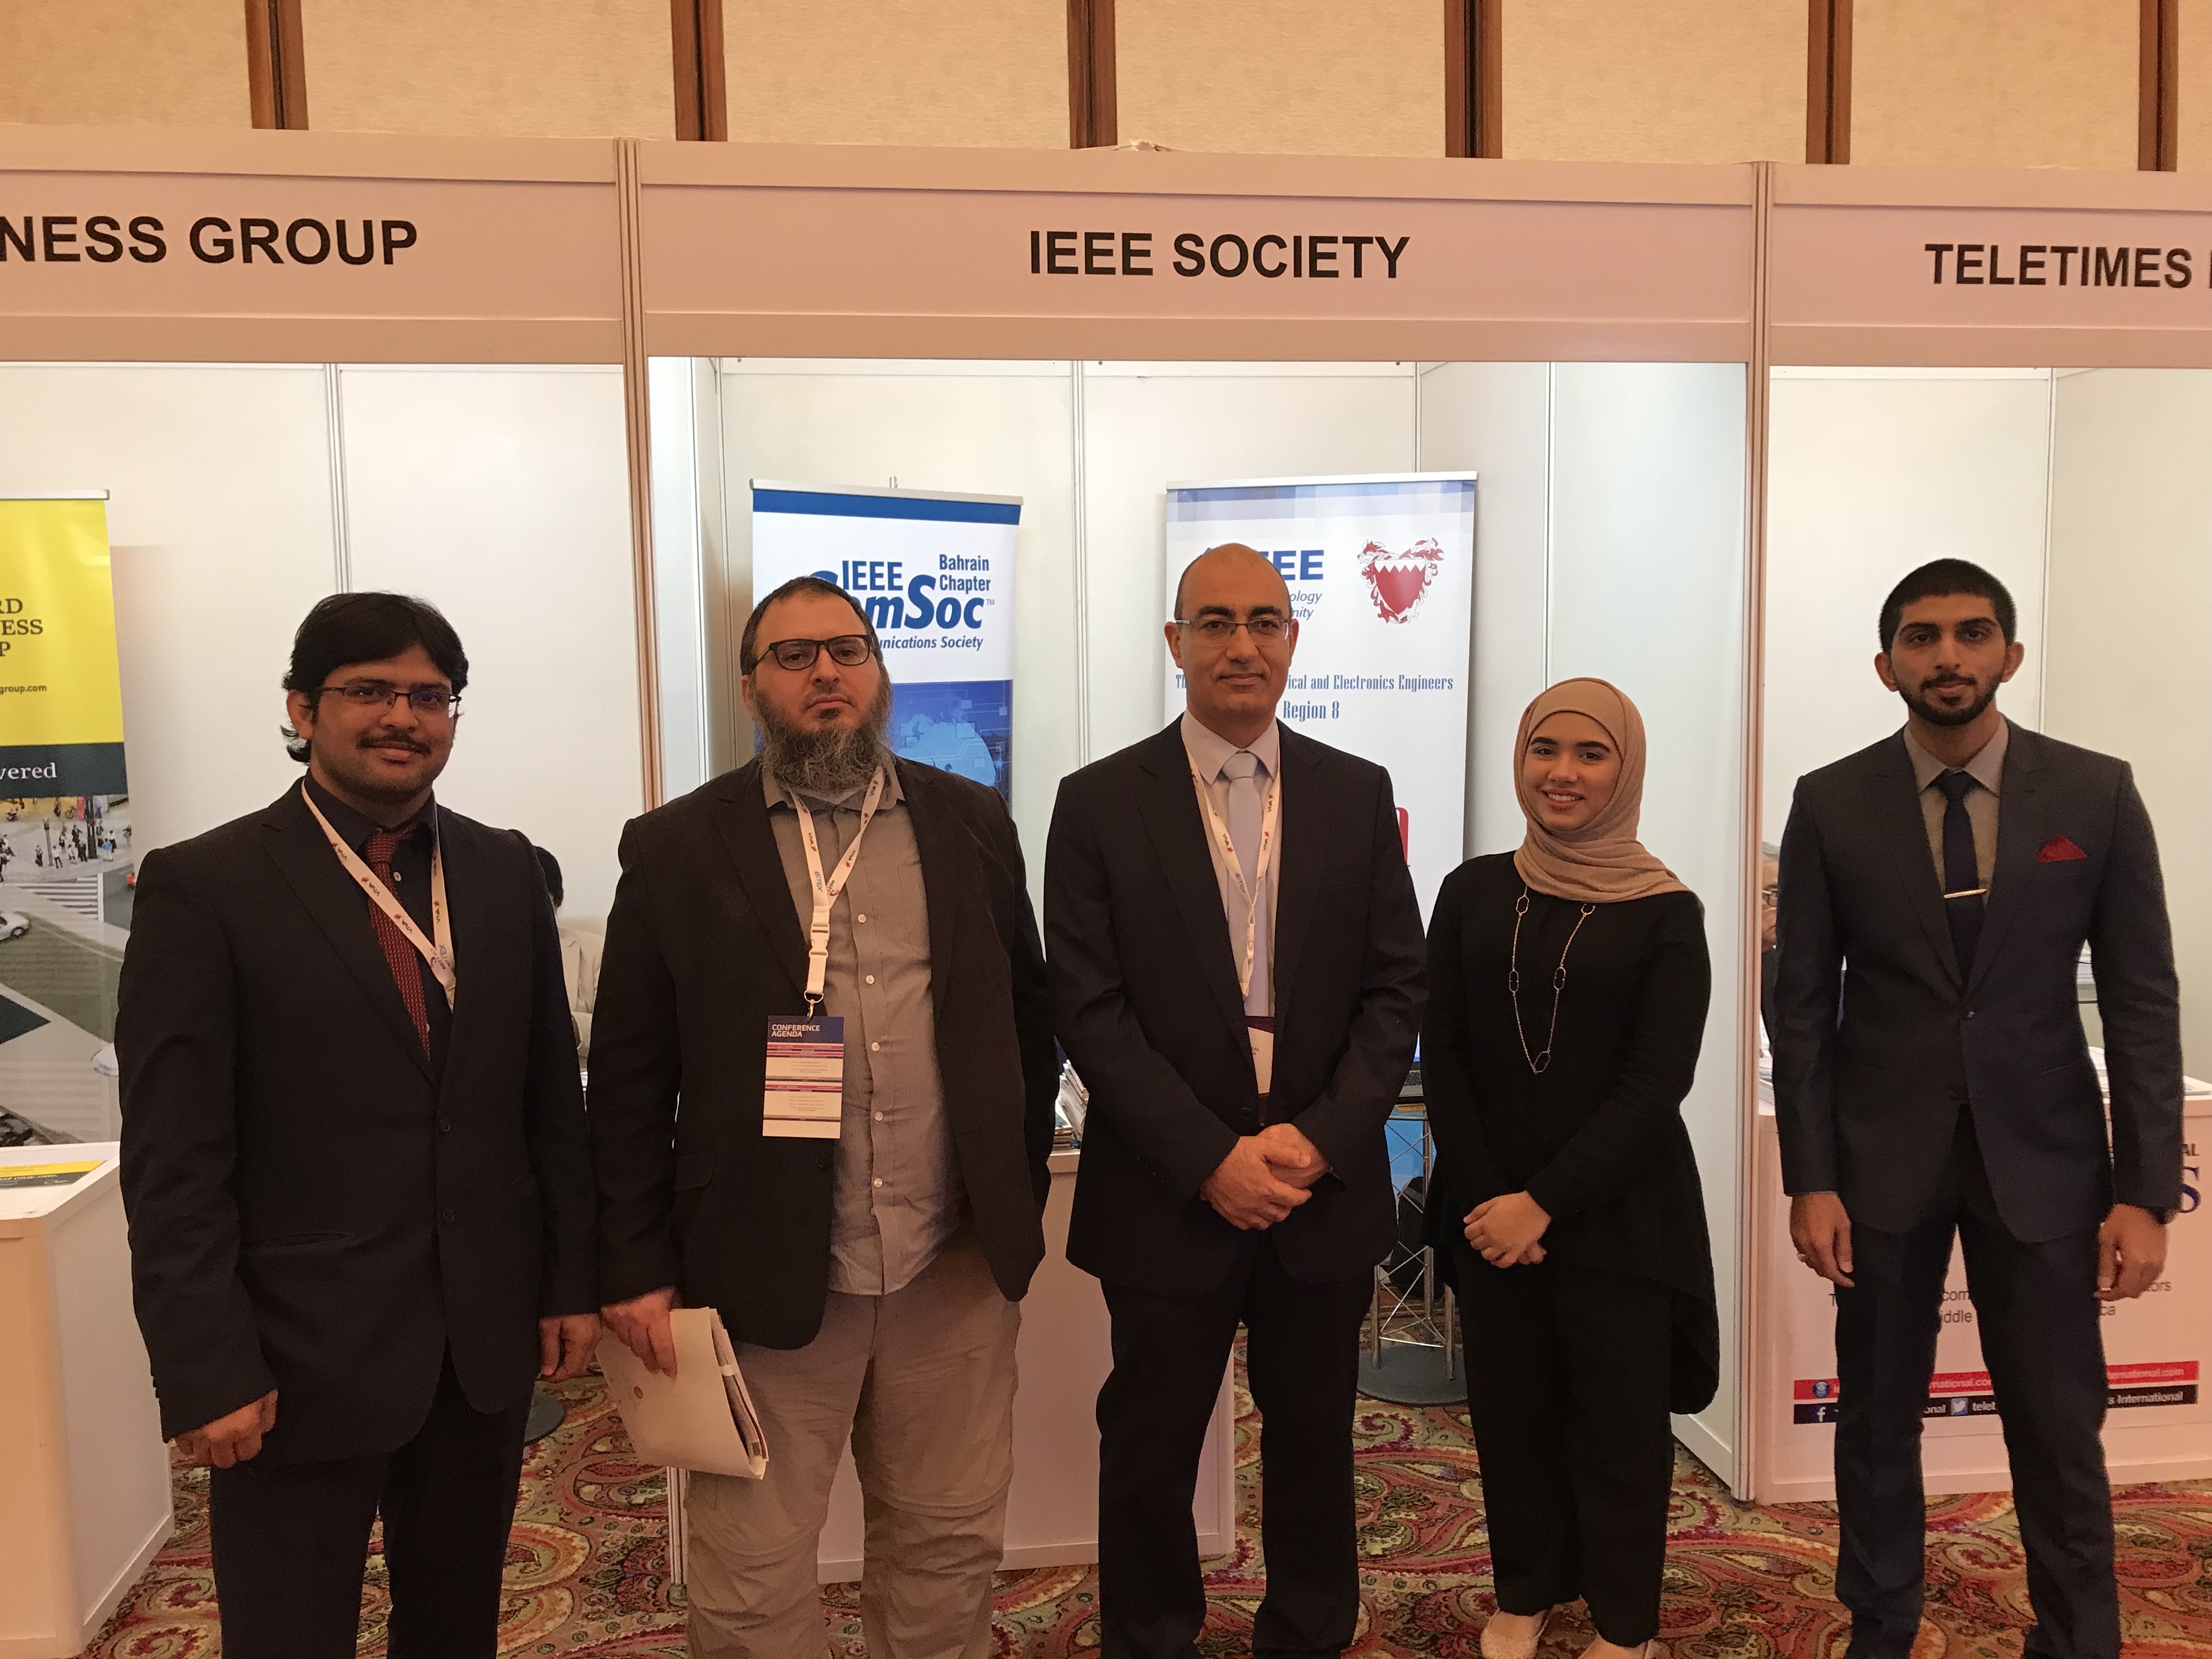 IEEE ComSoc Bahrain chapter Signed MOU to be strategic partner with BTECH and Worksmart W.L.L (2018)